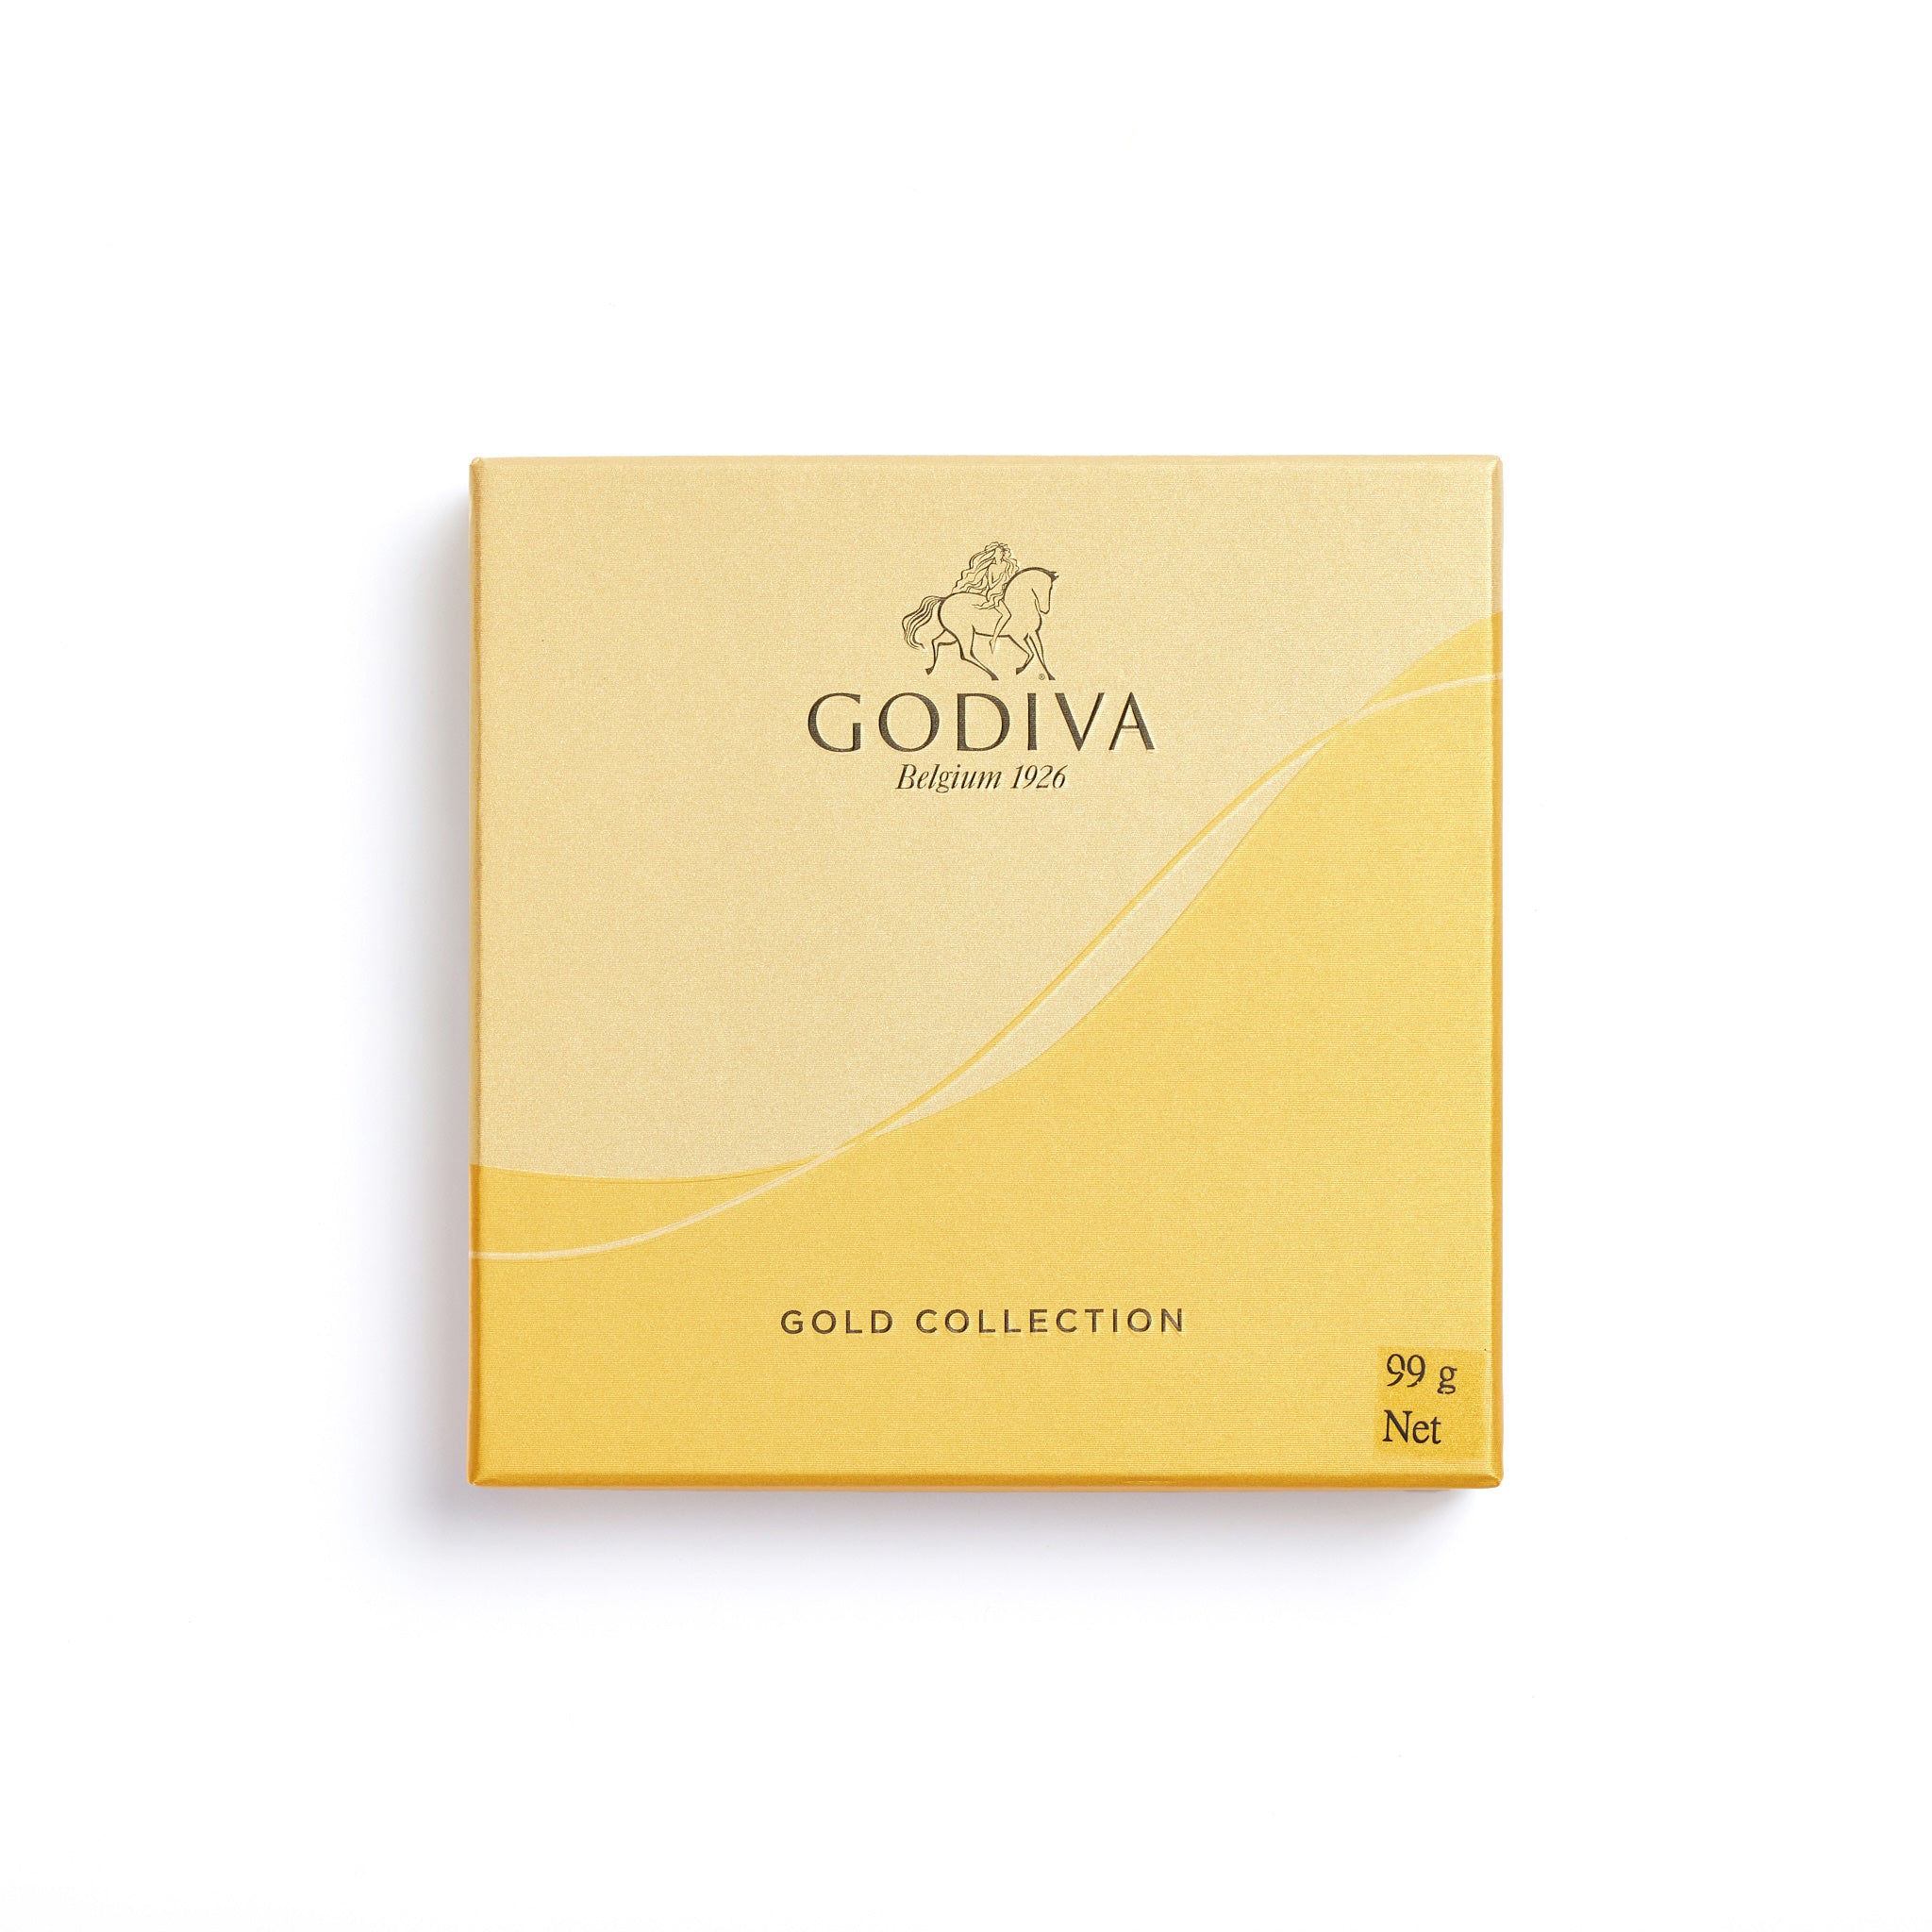 Gold Collection Gift Box, 9 Pieces | 99g